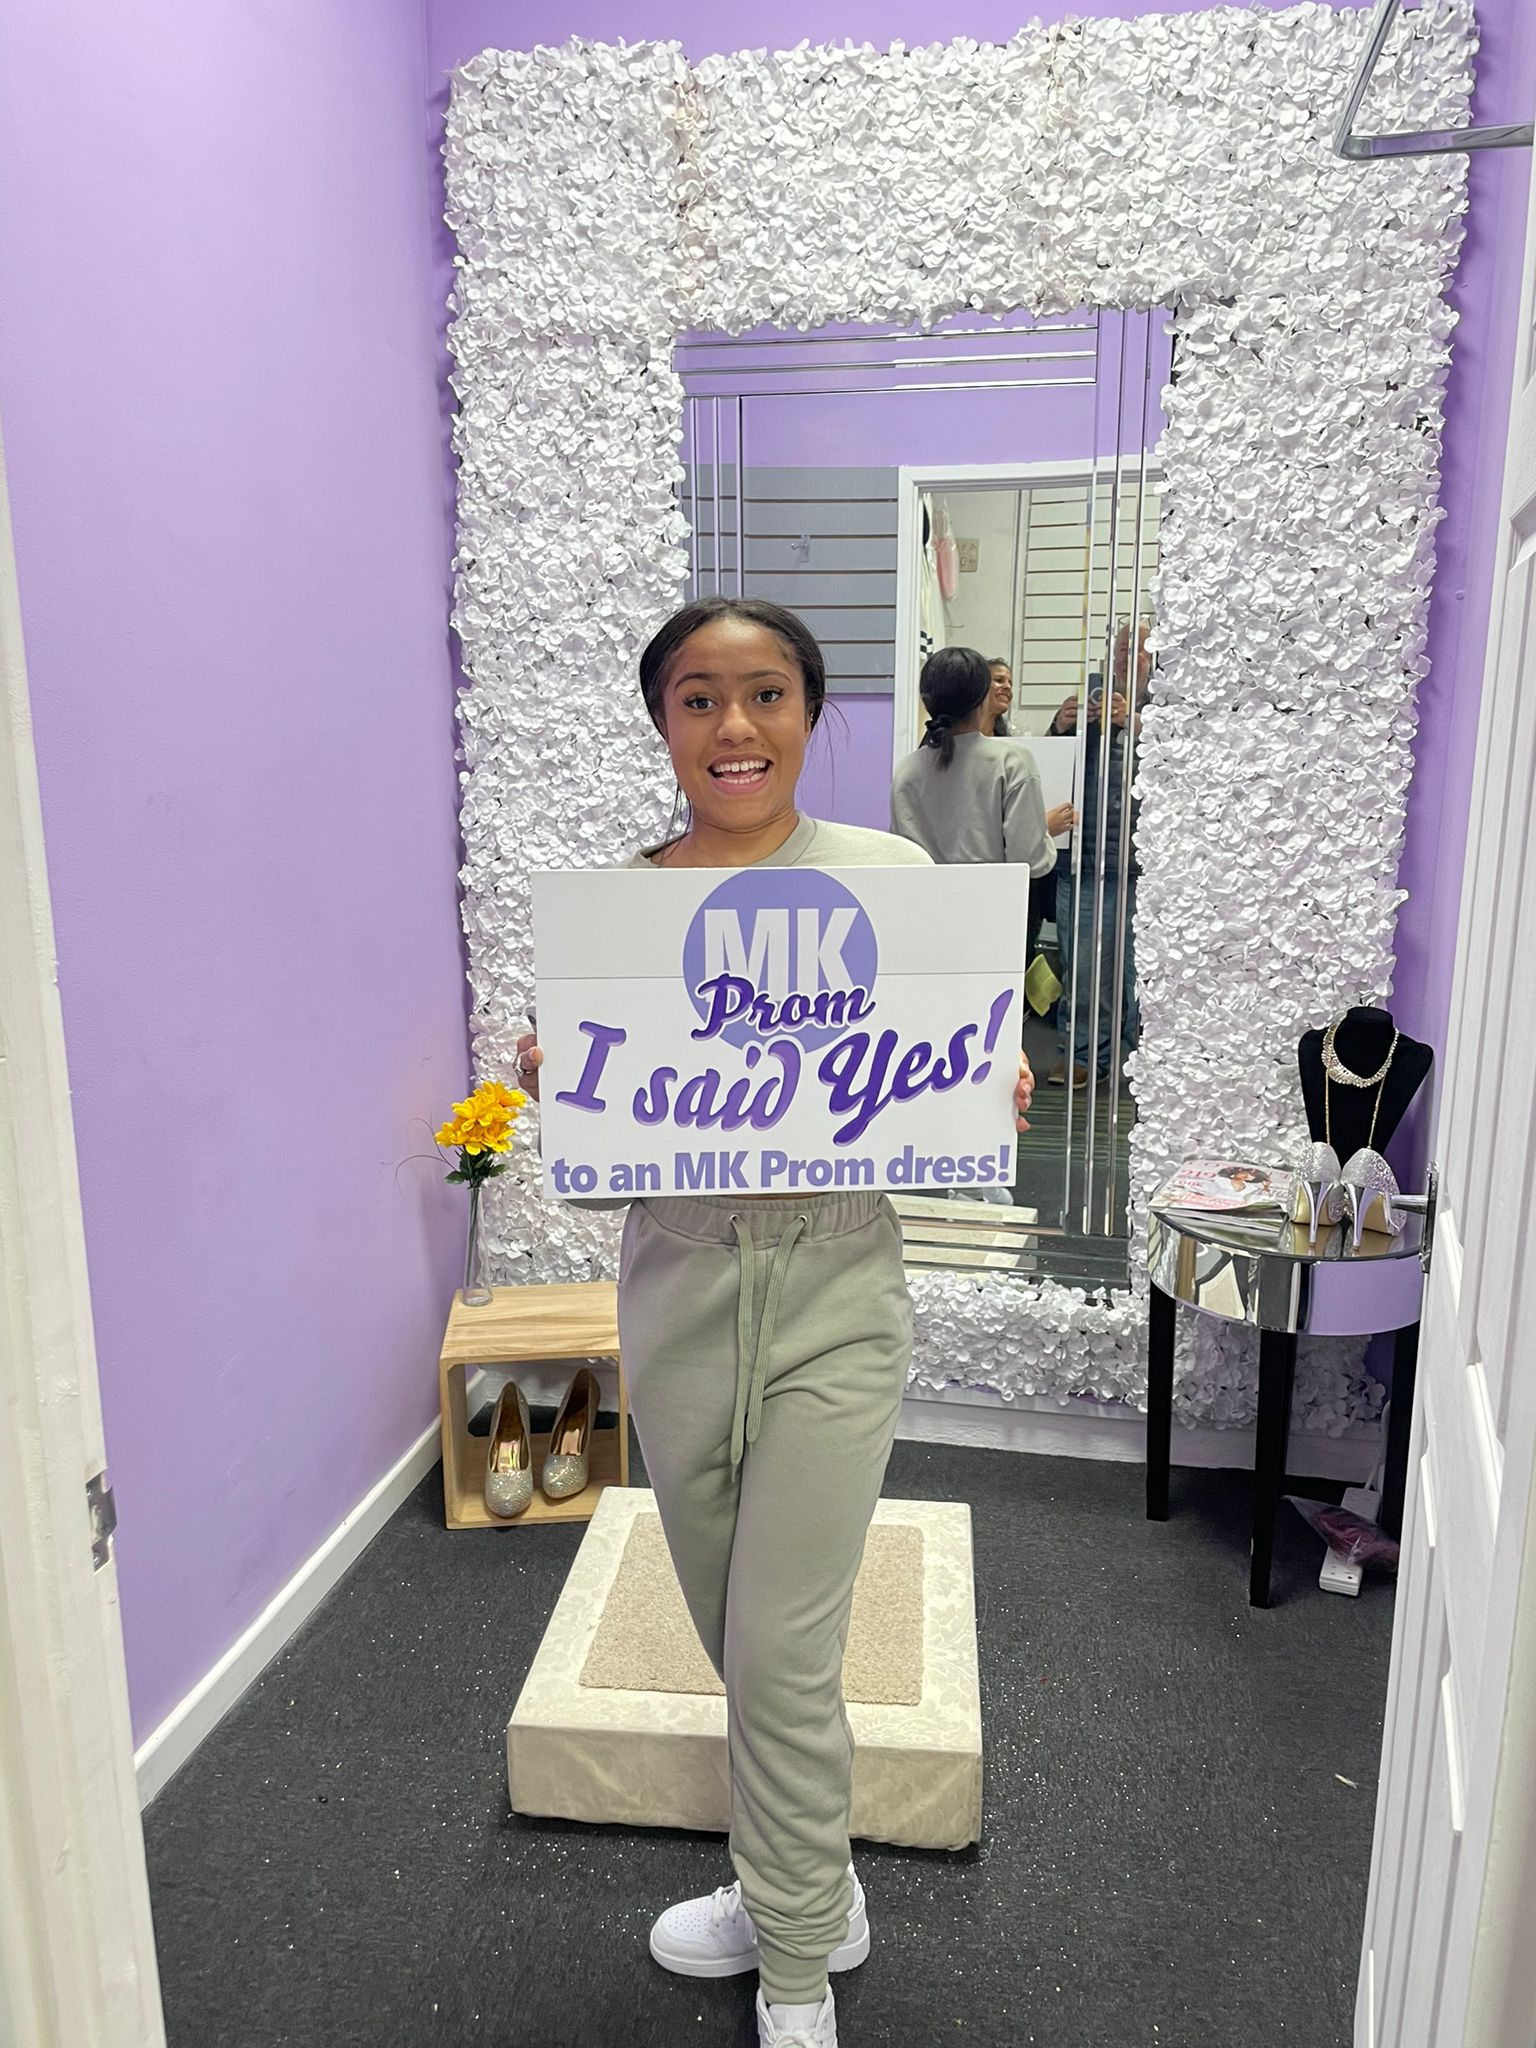 She said YES to an MK Prom Dress -- In our All-New Fitting Rooms at our Bletchley Salon!